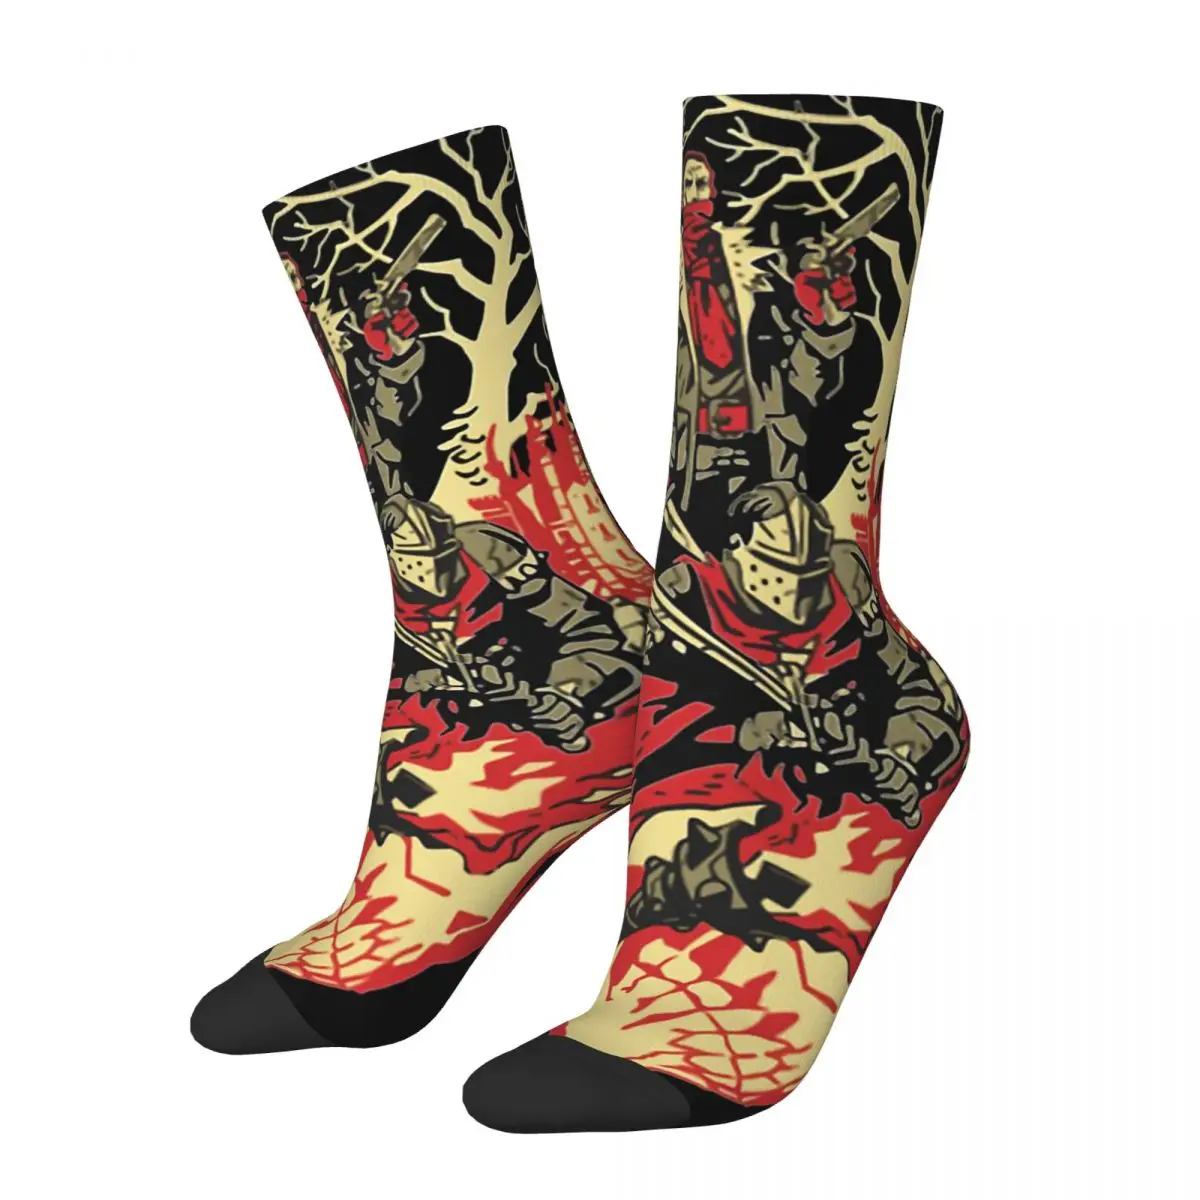 

Funny Crazy compression Roguelike Game Sock for Men Hip Hop Harajuku Darkest Dungeon Game Happy Quality Pattern Printed